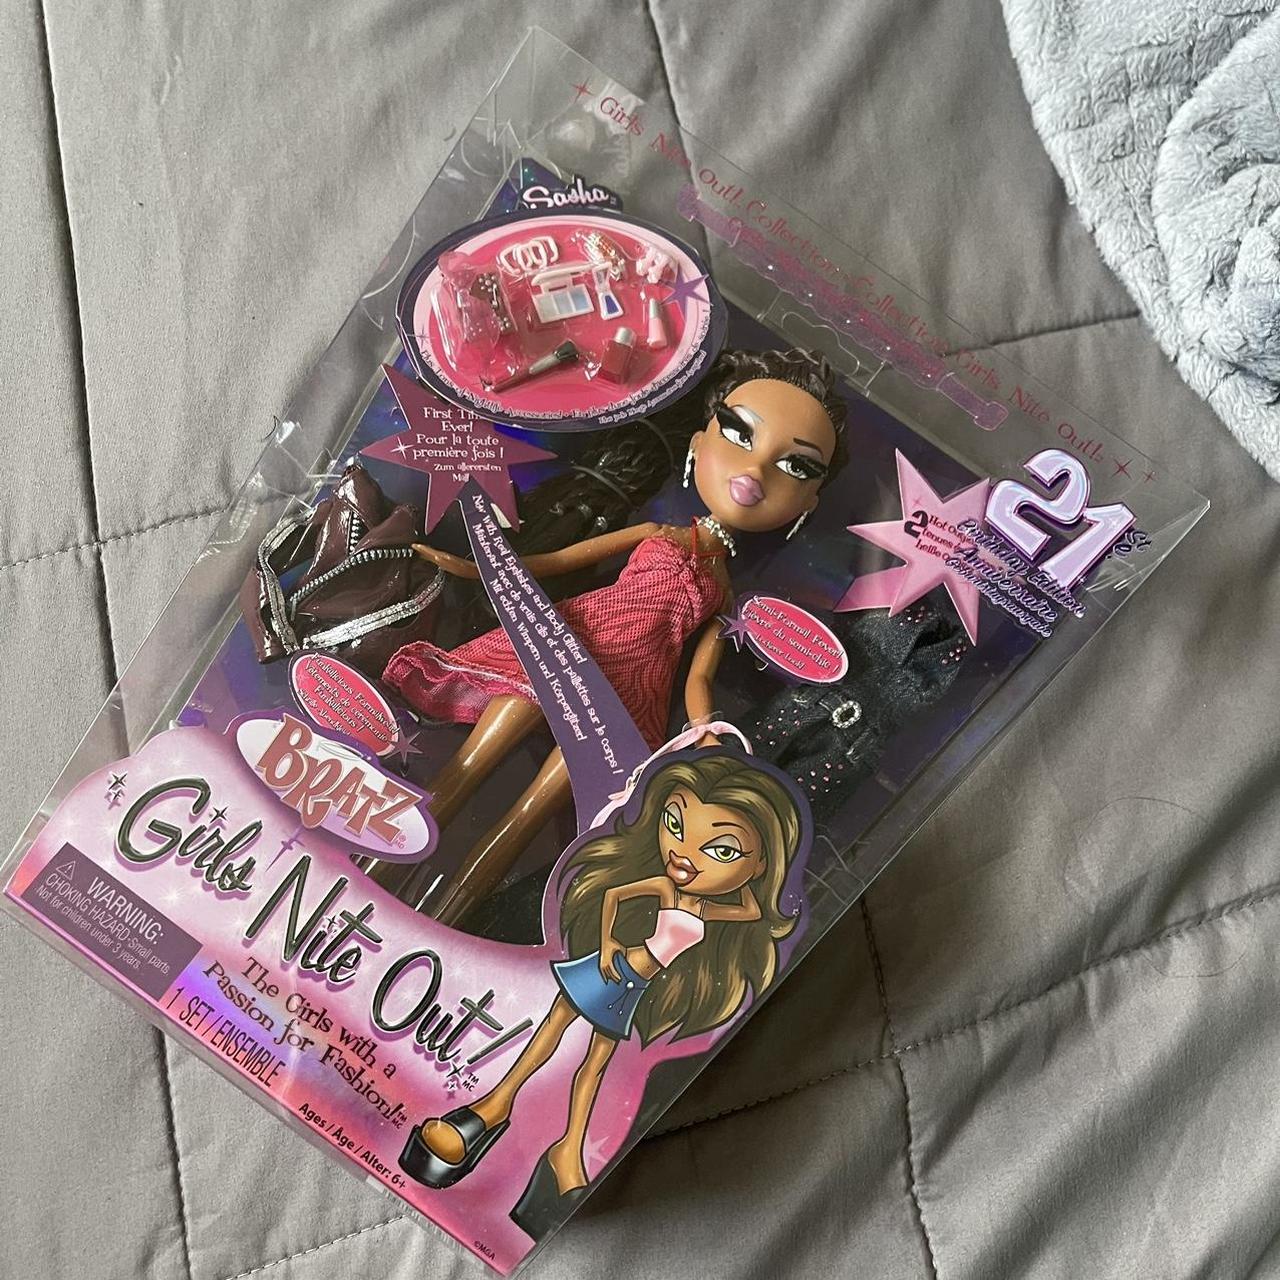 Bratz bag Do not purchase, looking for offers - Depop